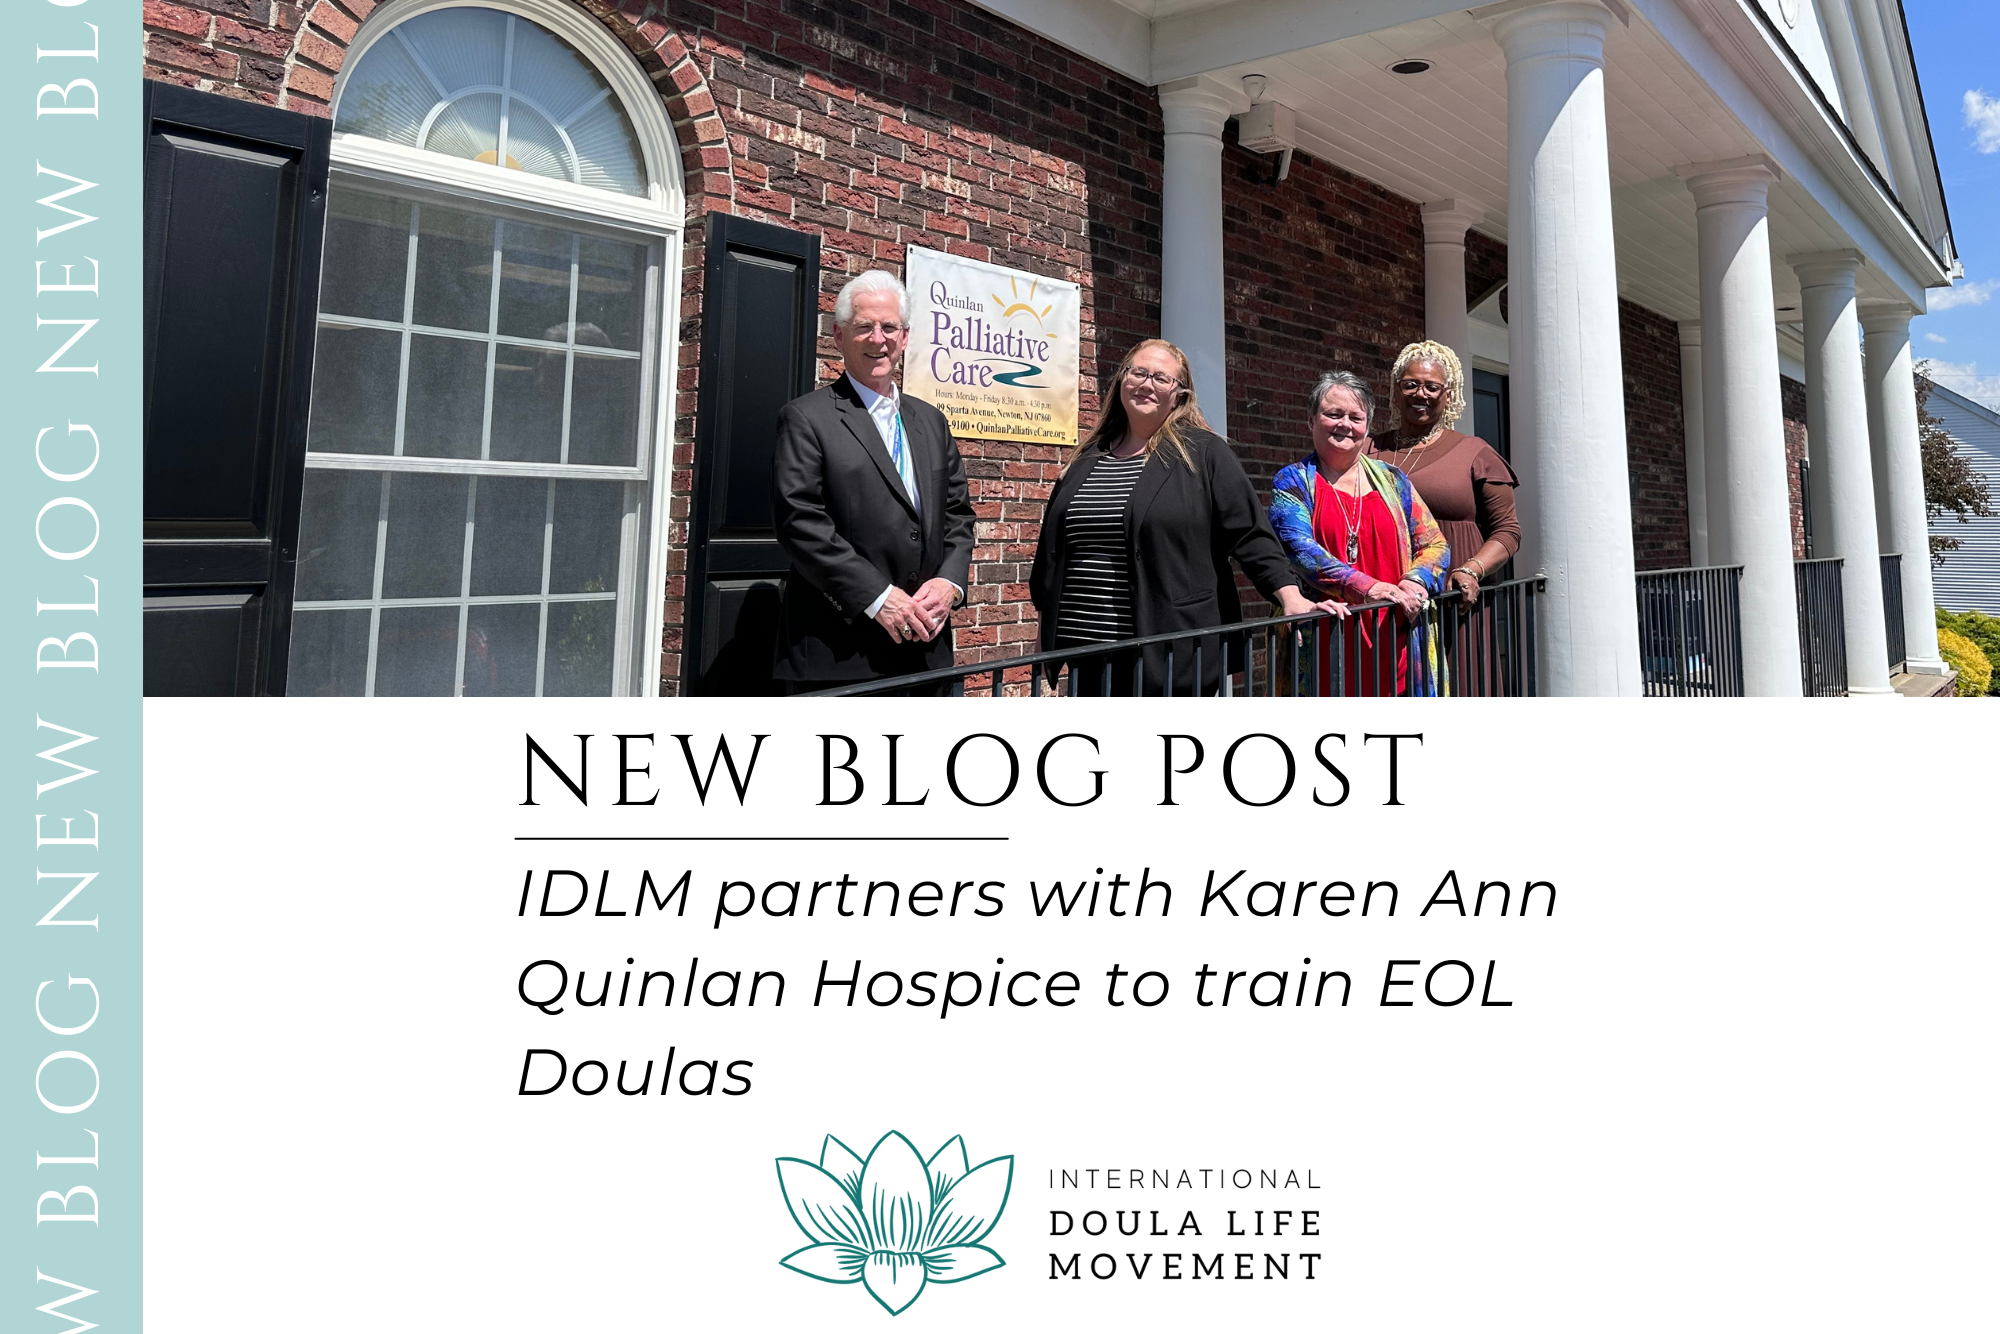 IDLM partners with Karen Ann Quinlan Hospice to train EOL Doulas